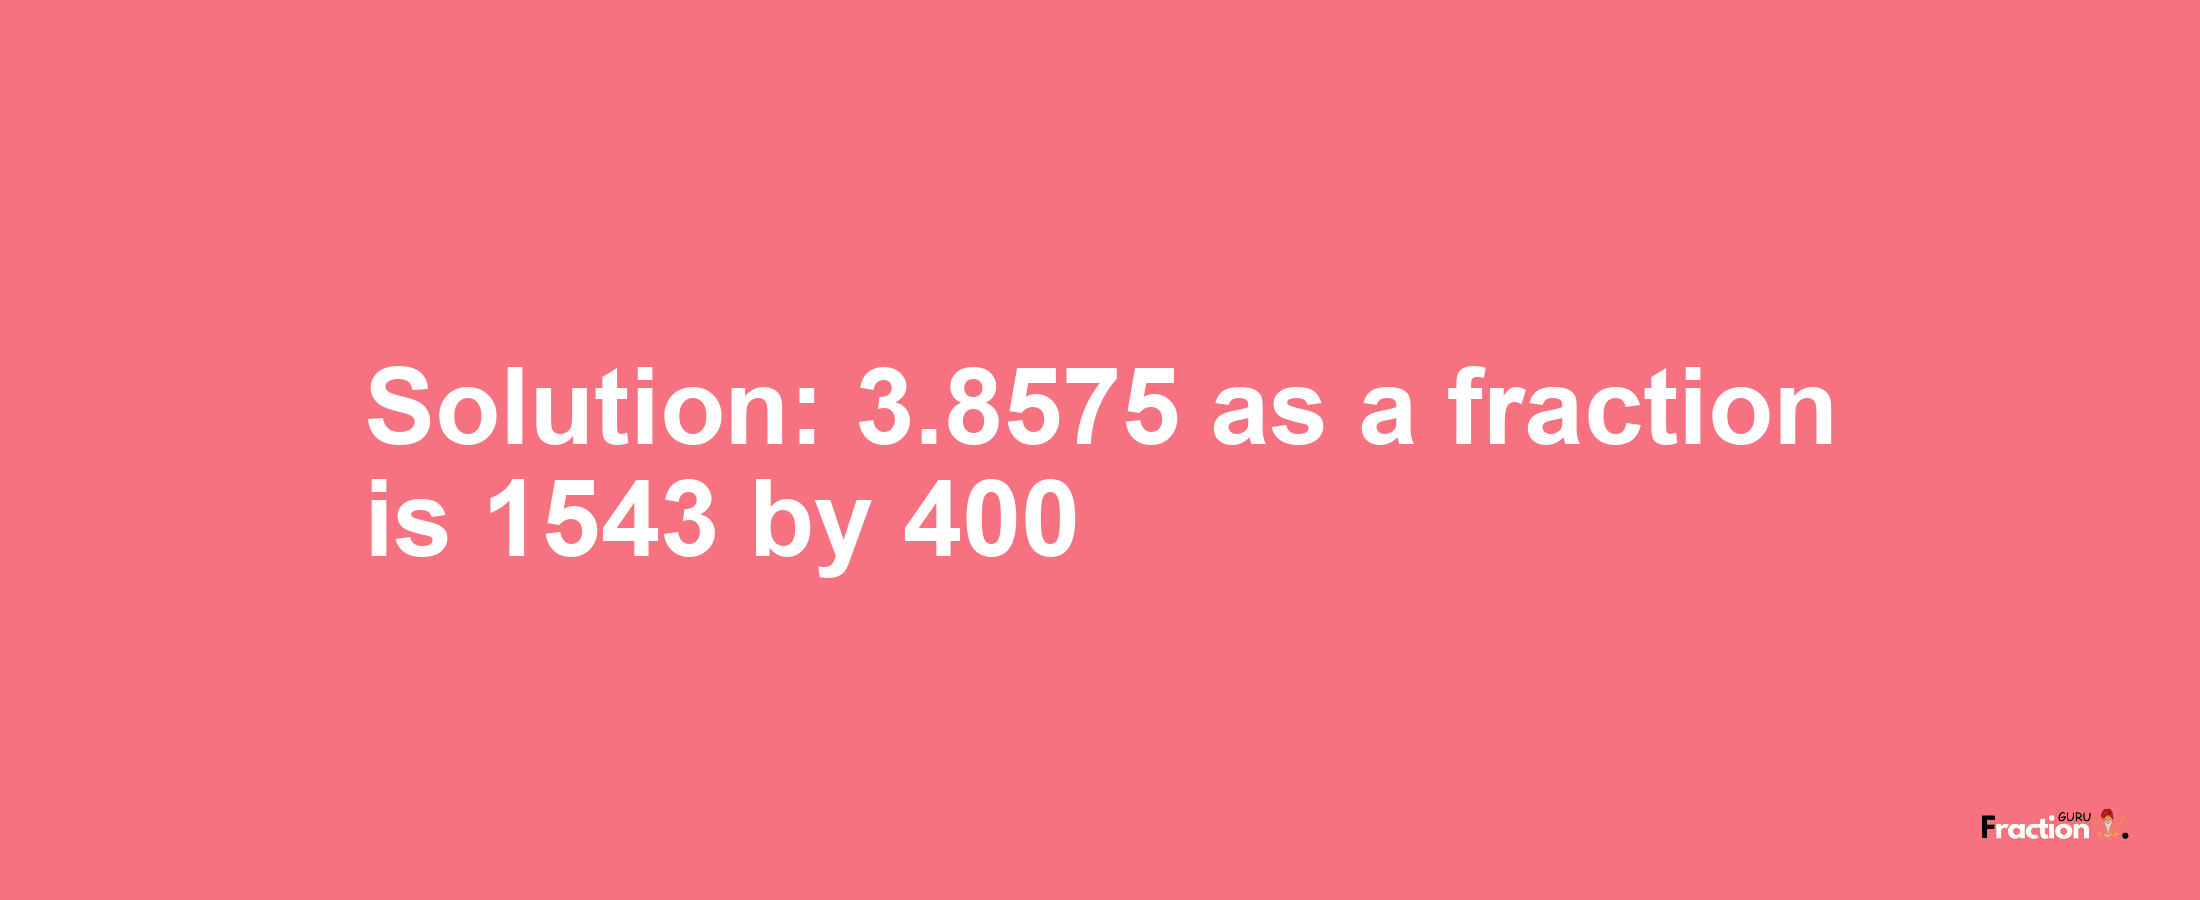 Solution:3.8575 as a fraction is 1543/400